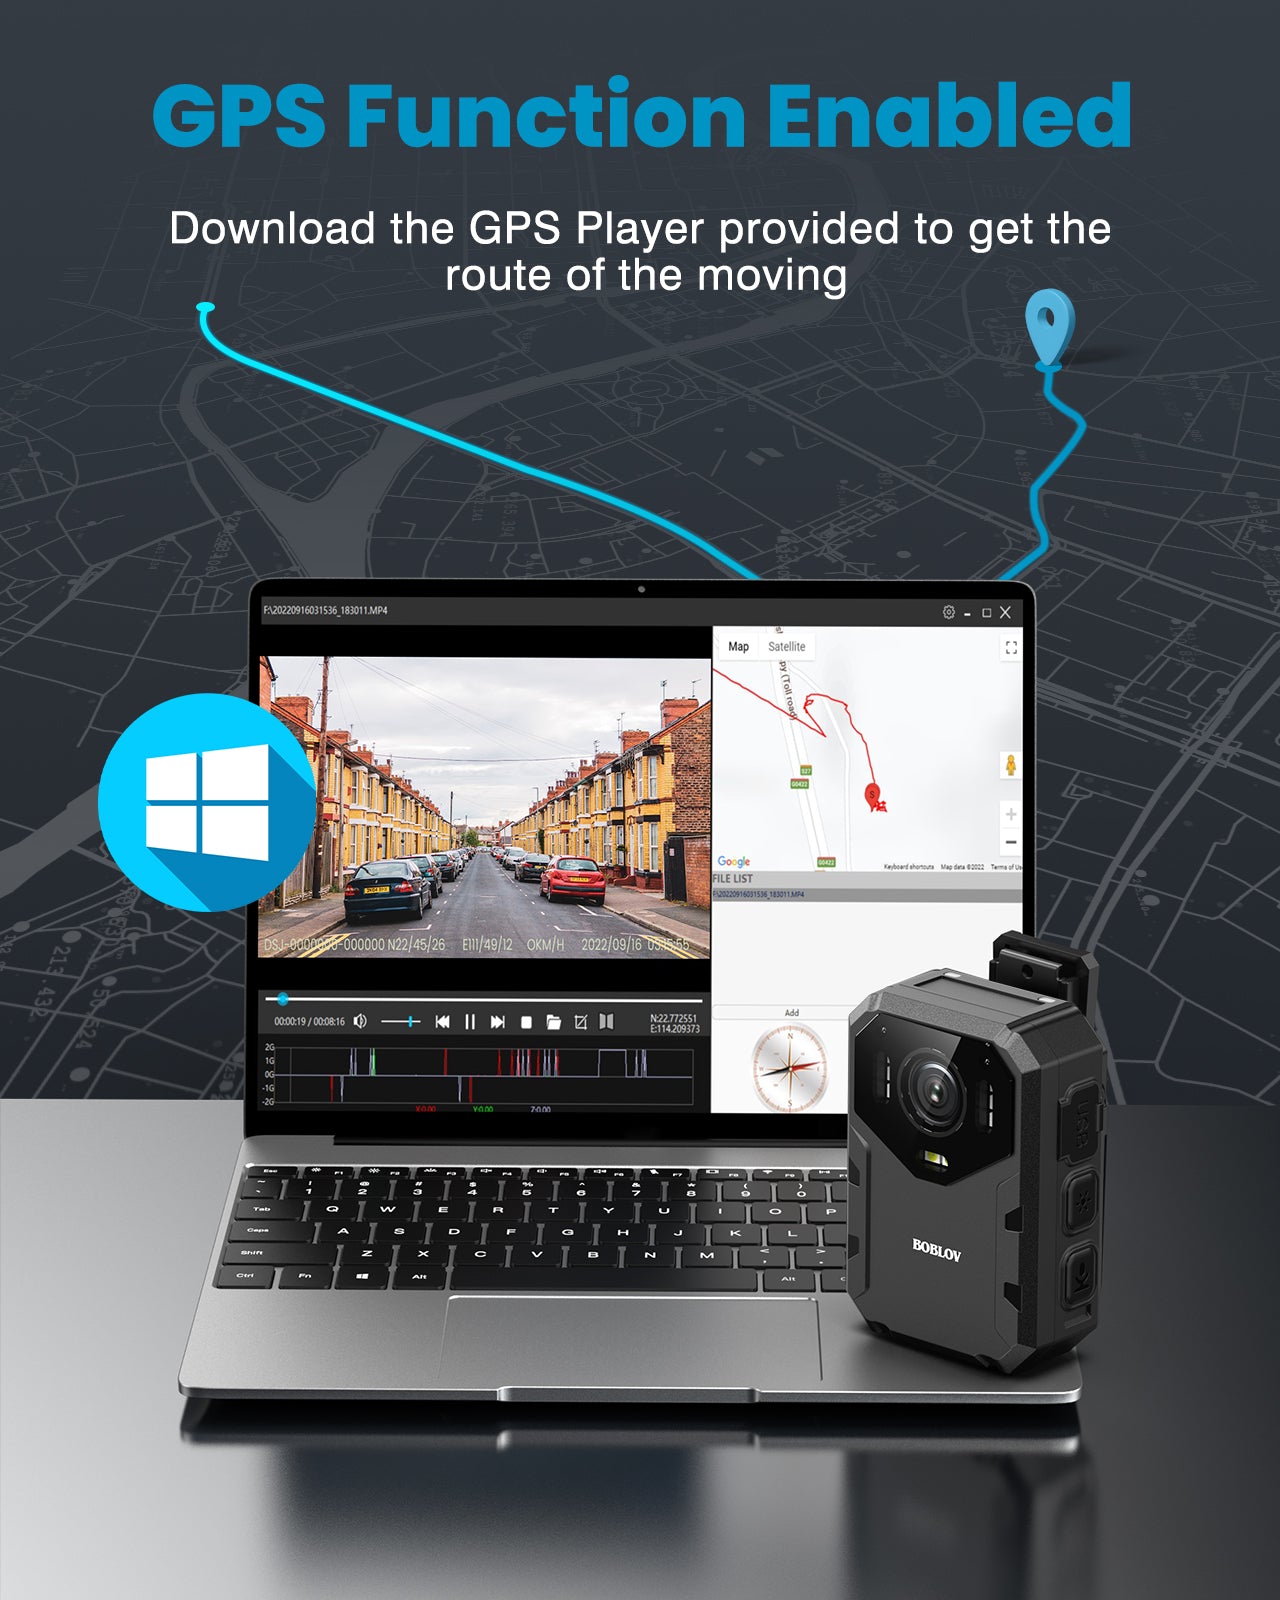 BOBLOV B4K1 128GB 4K Body Camera with GPS, 3100mAh Battery for 10-12hours Shooting, With Car Suction Mount and Car Charger